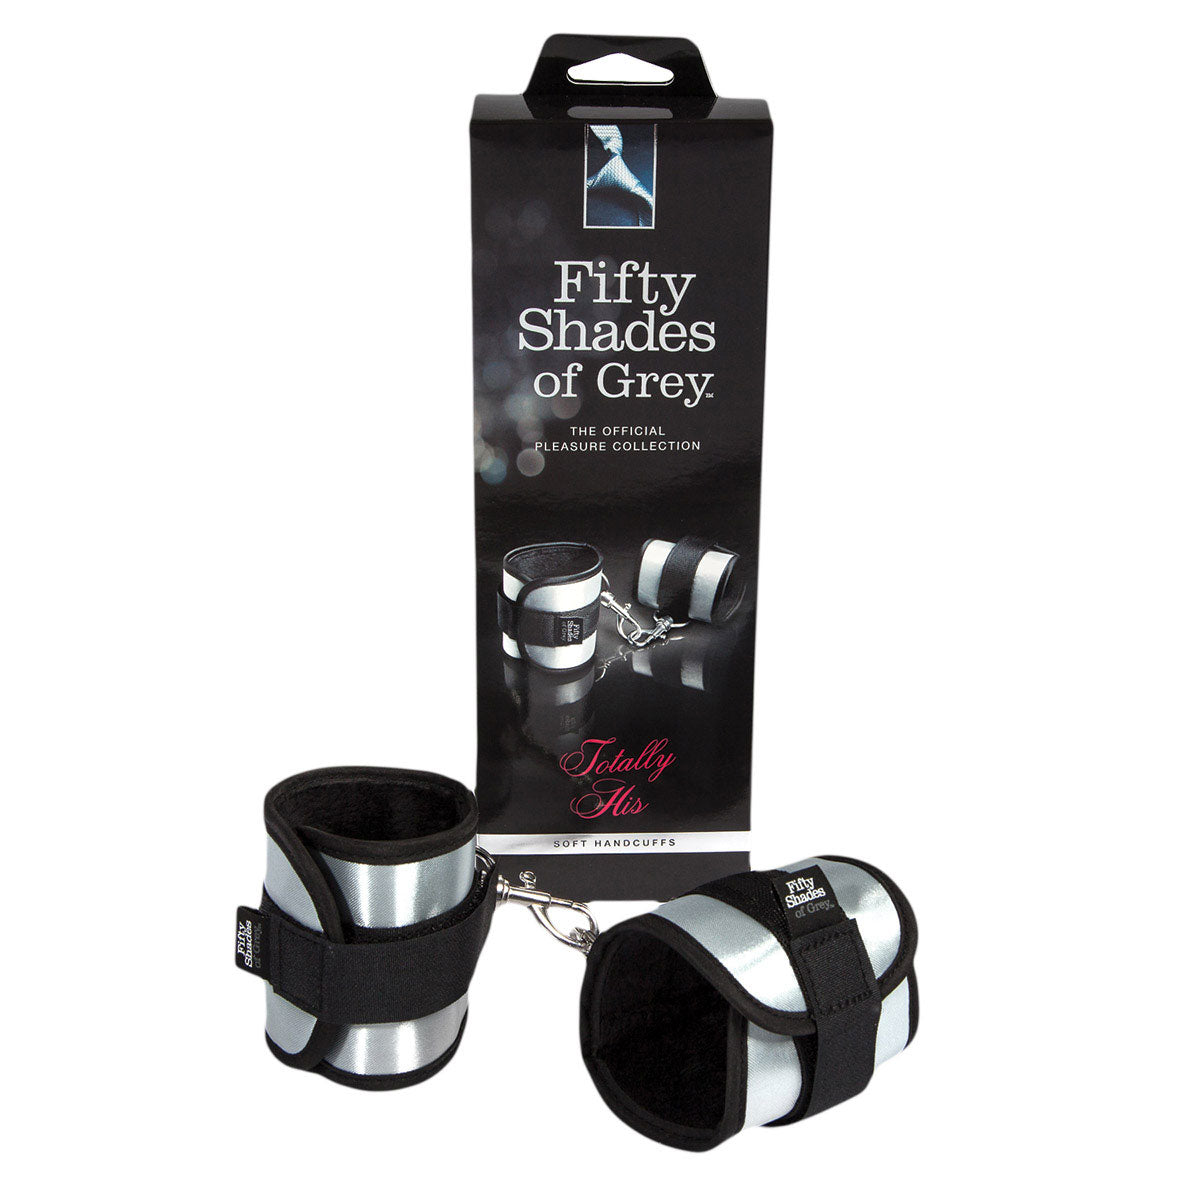 Fifty Shades Of Grey - Totally His Handcuffs